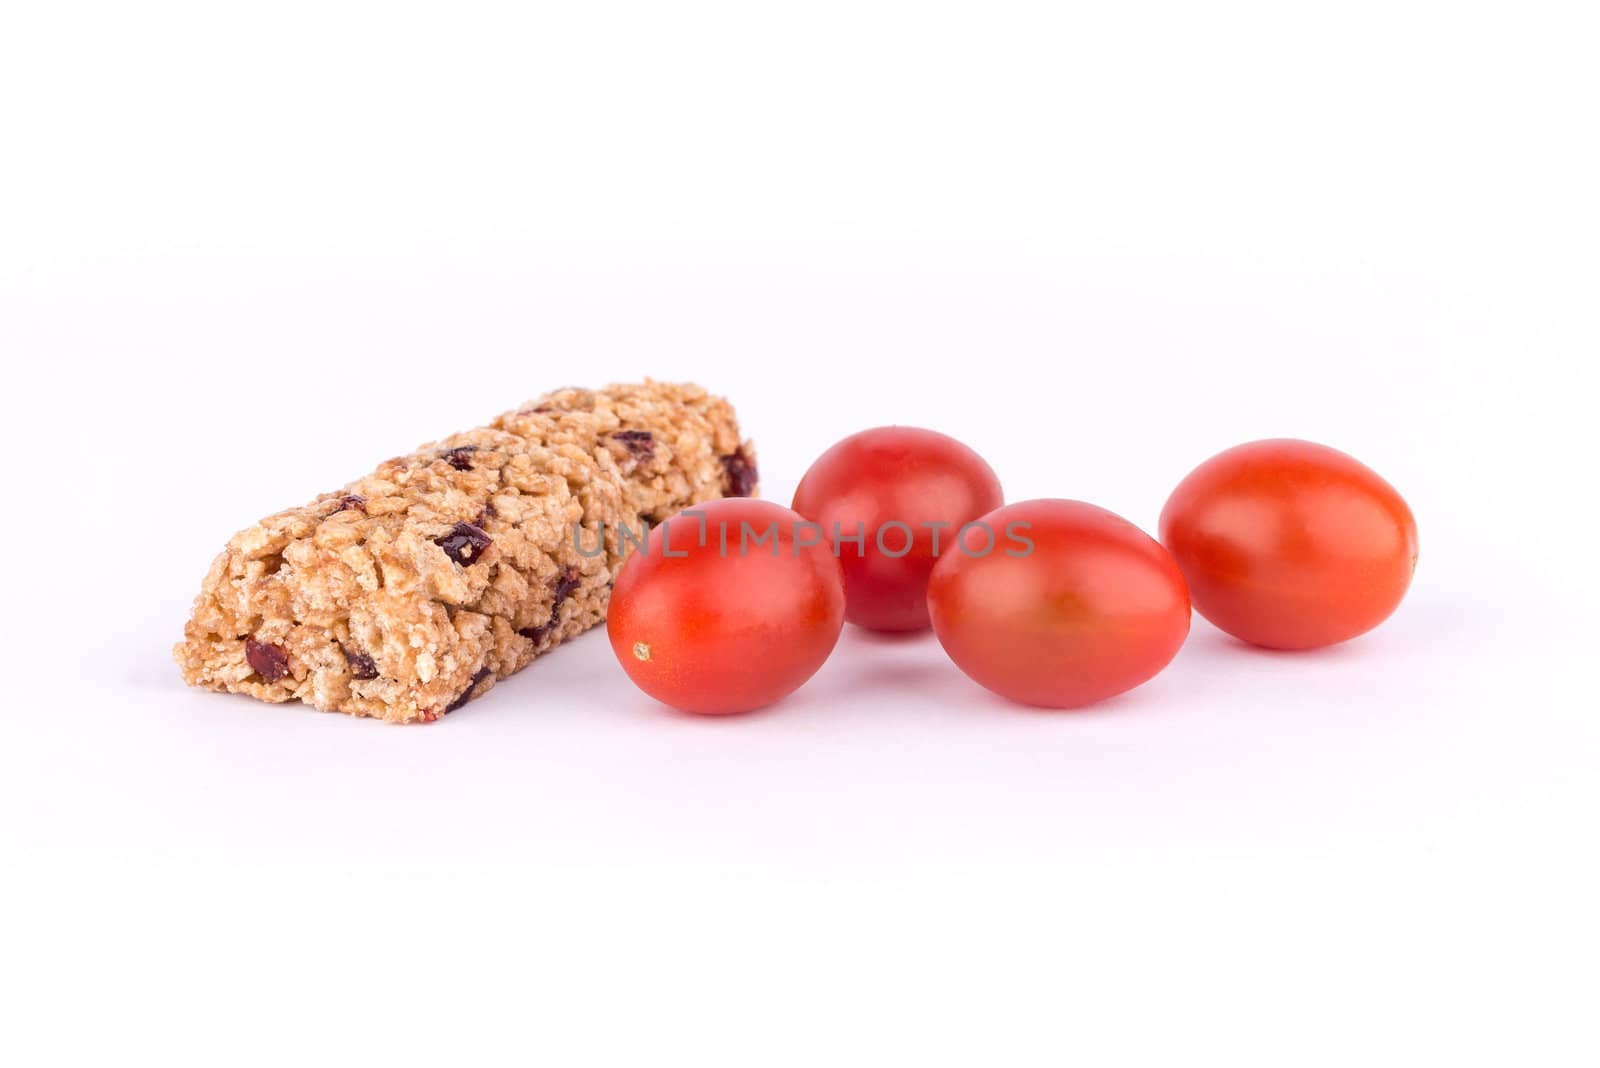 Cereal bars with red fruits.